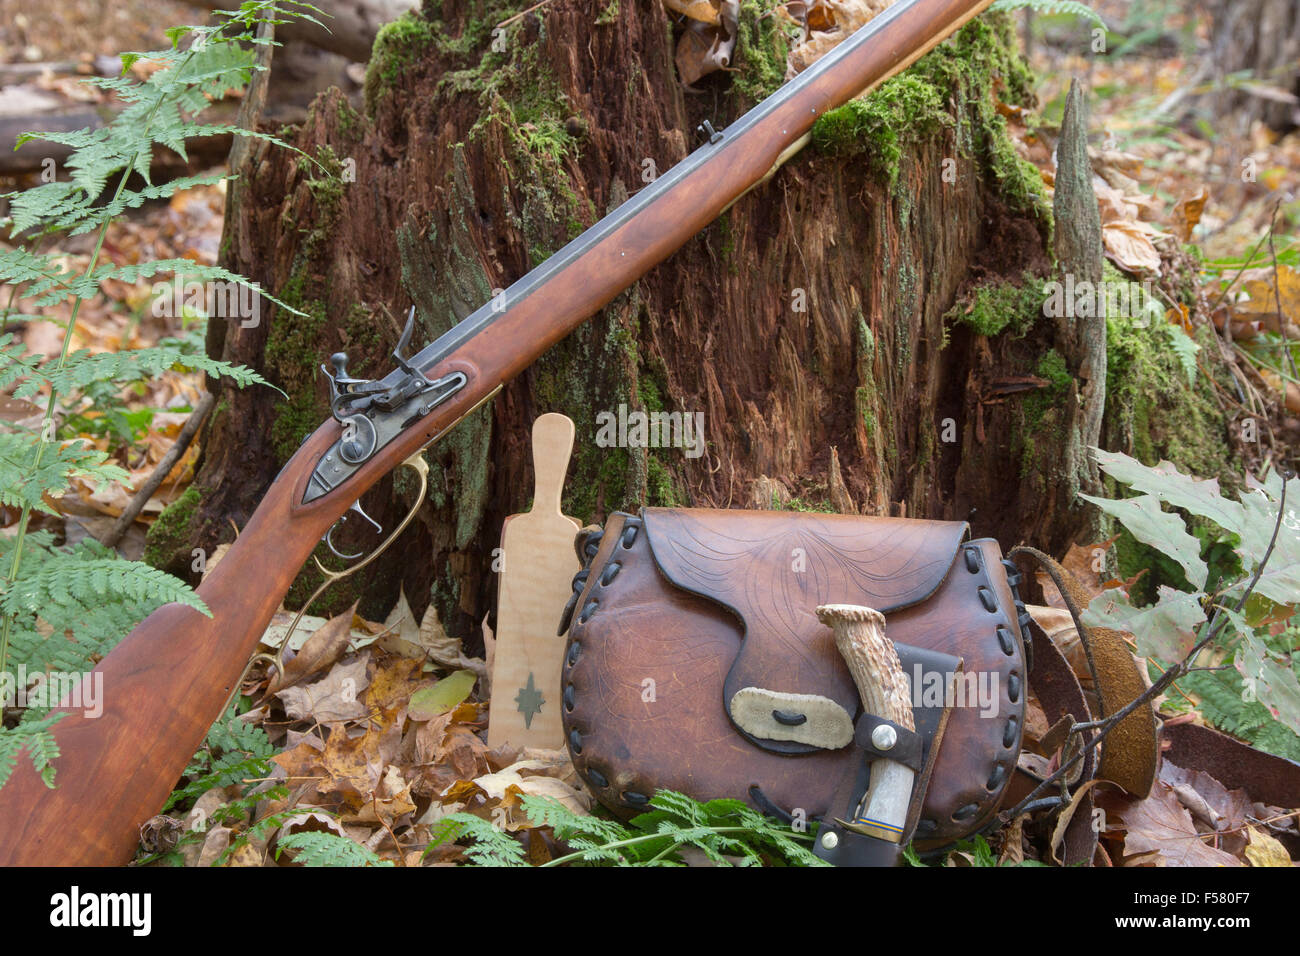 A hand-made flintlock rifle and accessories adorn a rotting stump